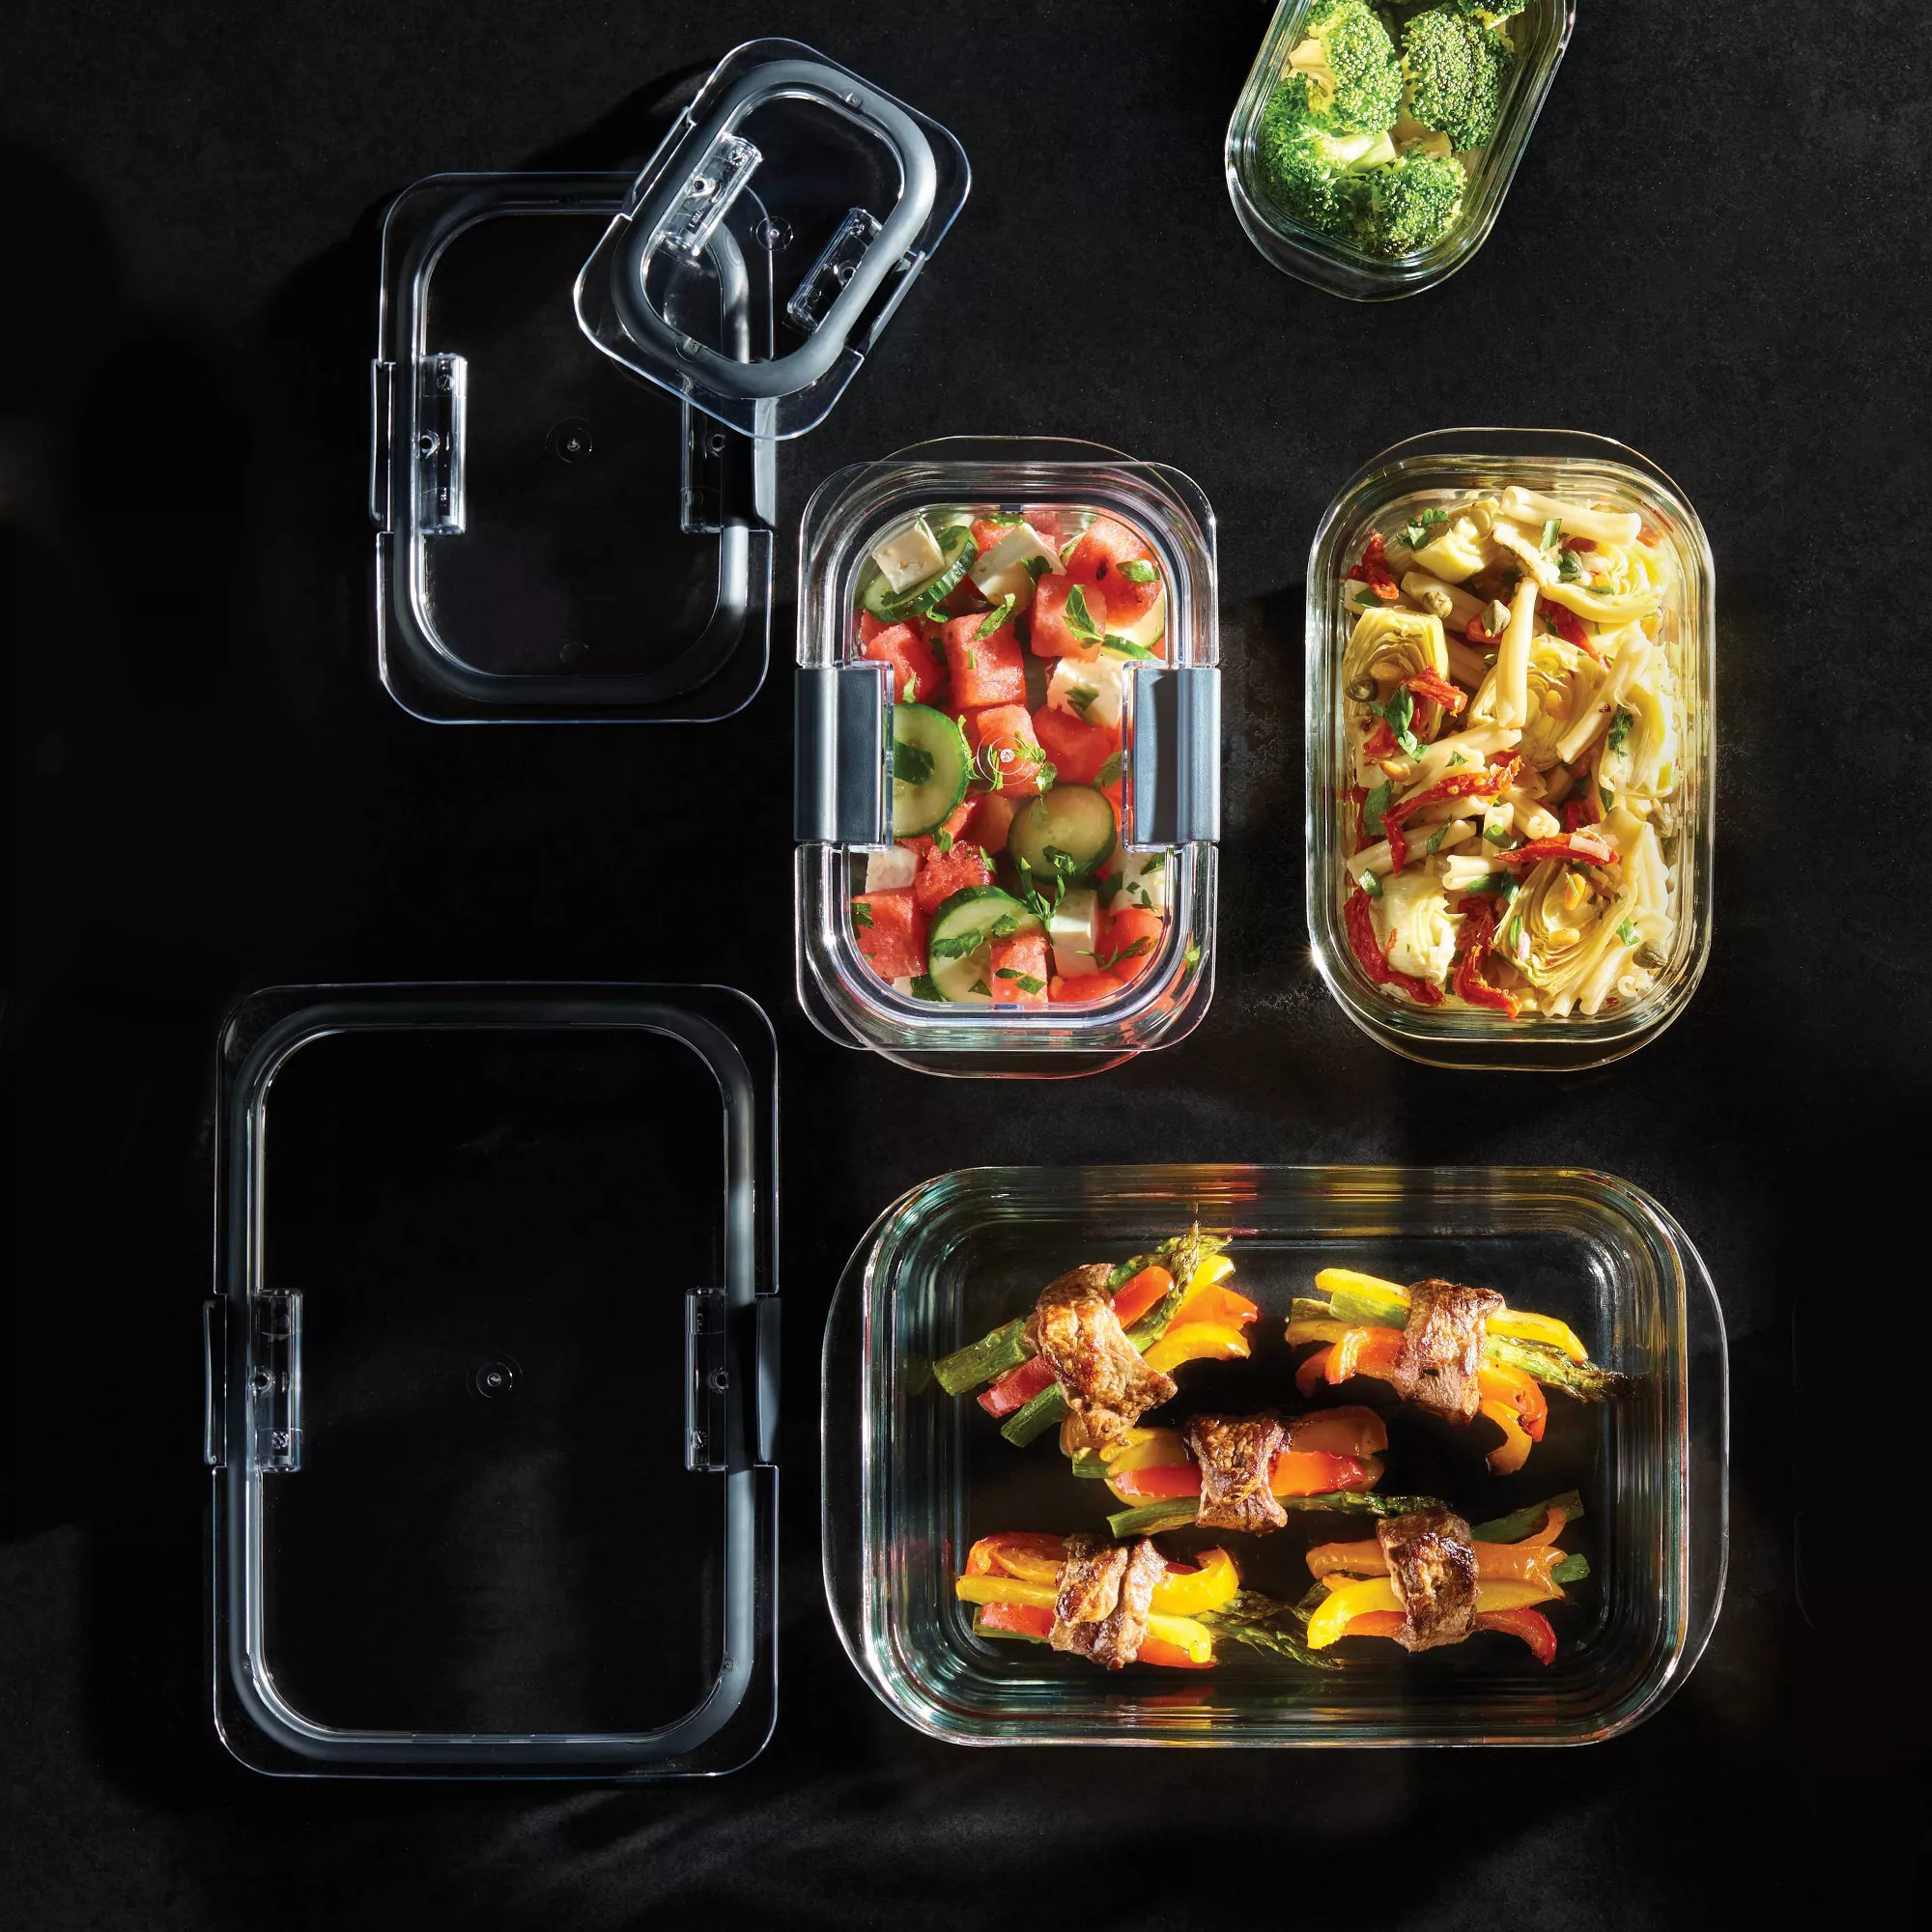 The clear containers in various sizes